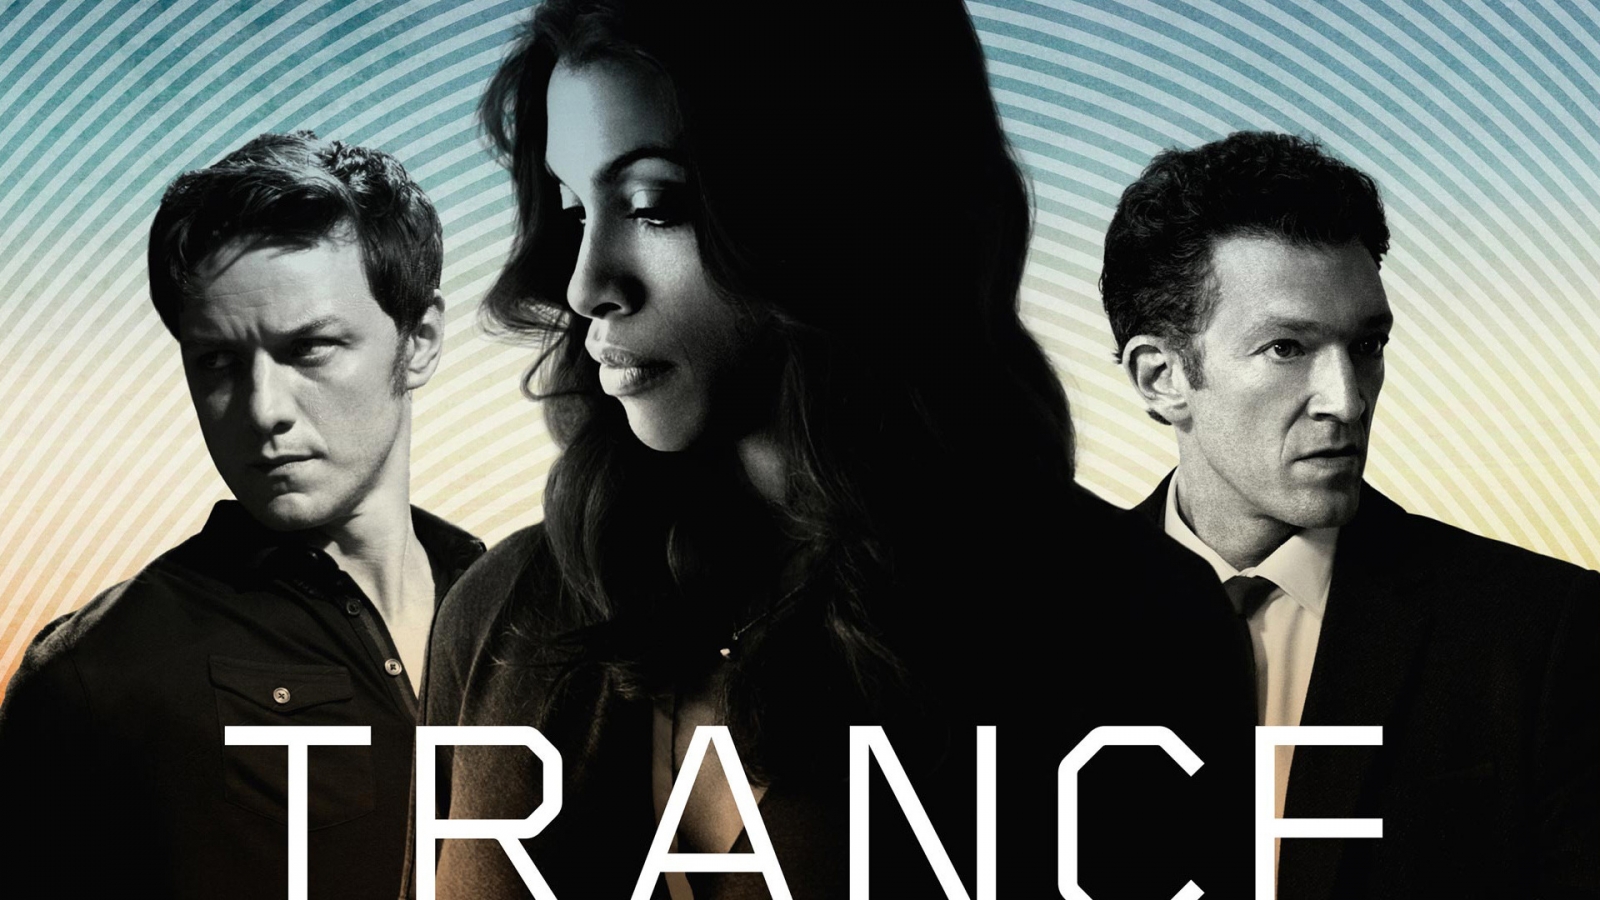 Trance 2013 Movie for 1600 x 900 HDTV resolution